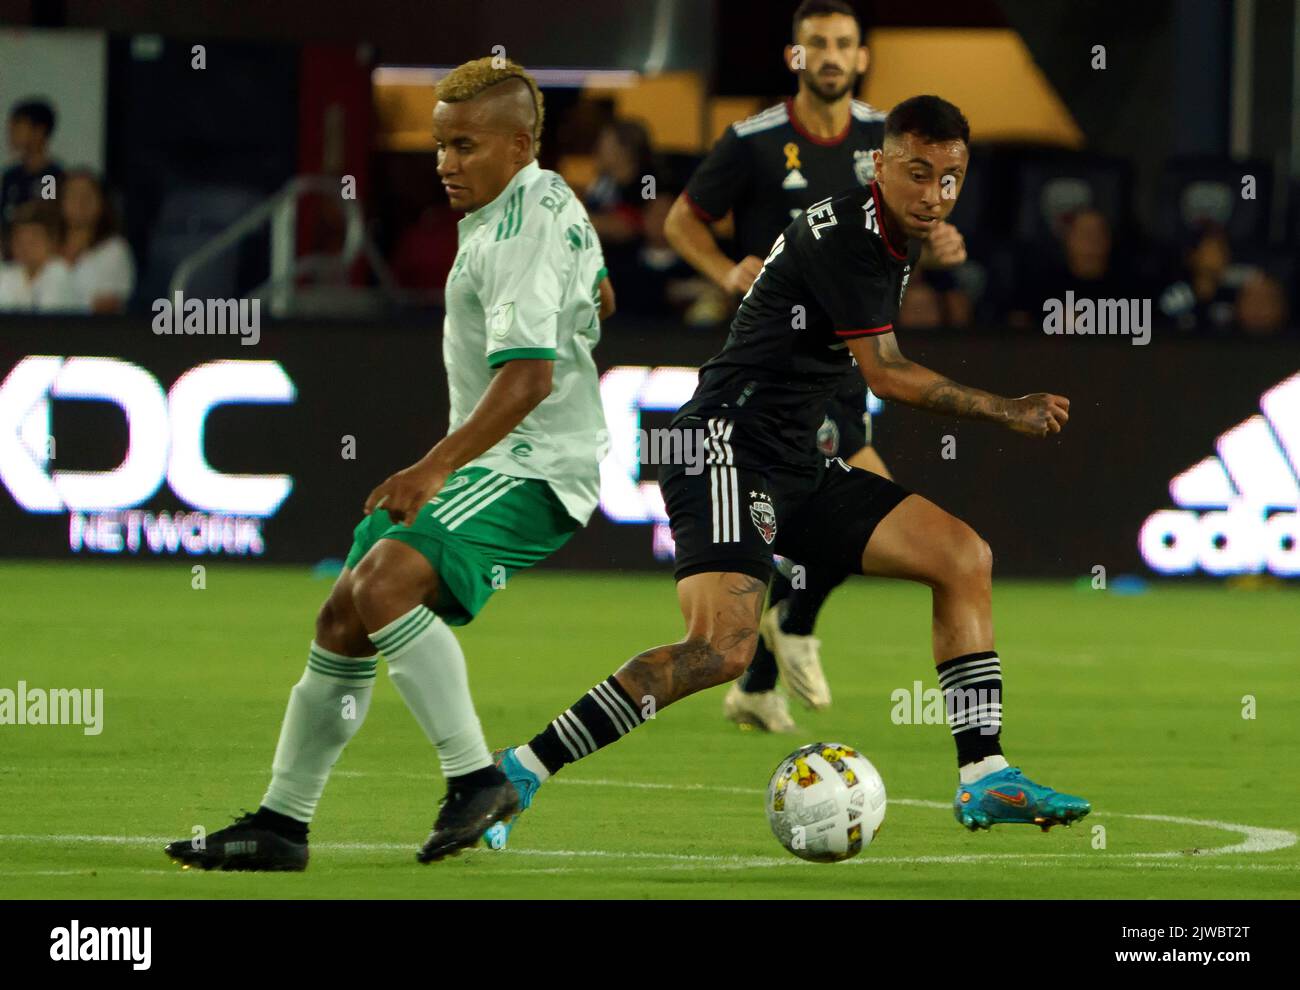 WASHINGTON, DC, USA - 4 SEPTEMBER 2022: D.C. United forward Martin Rodriguez (77) and Colorado Rapids forward Michael Barrios (12) challenge for the ball during a MLS match between D.C United and the Colorado Rapids, on September 04, 2022, at Audi Field, in Washington, DC. (Photo by Tony Quinn-Alamy Live News) Stock Photo